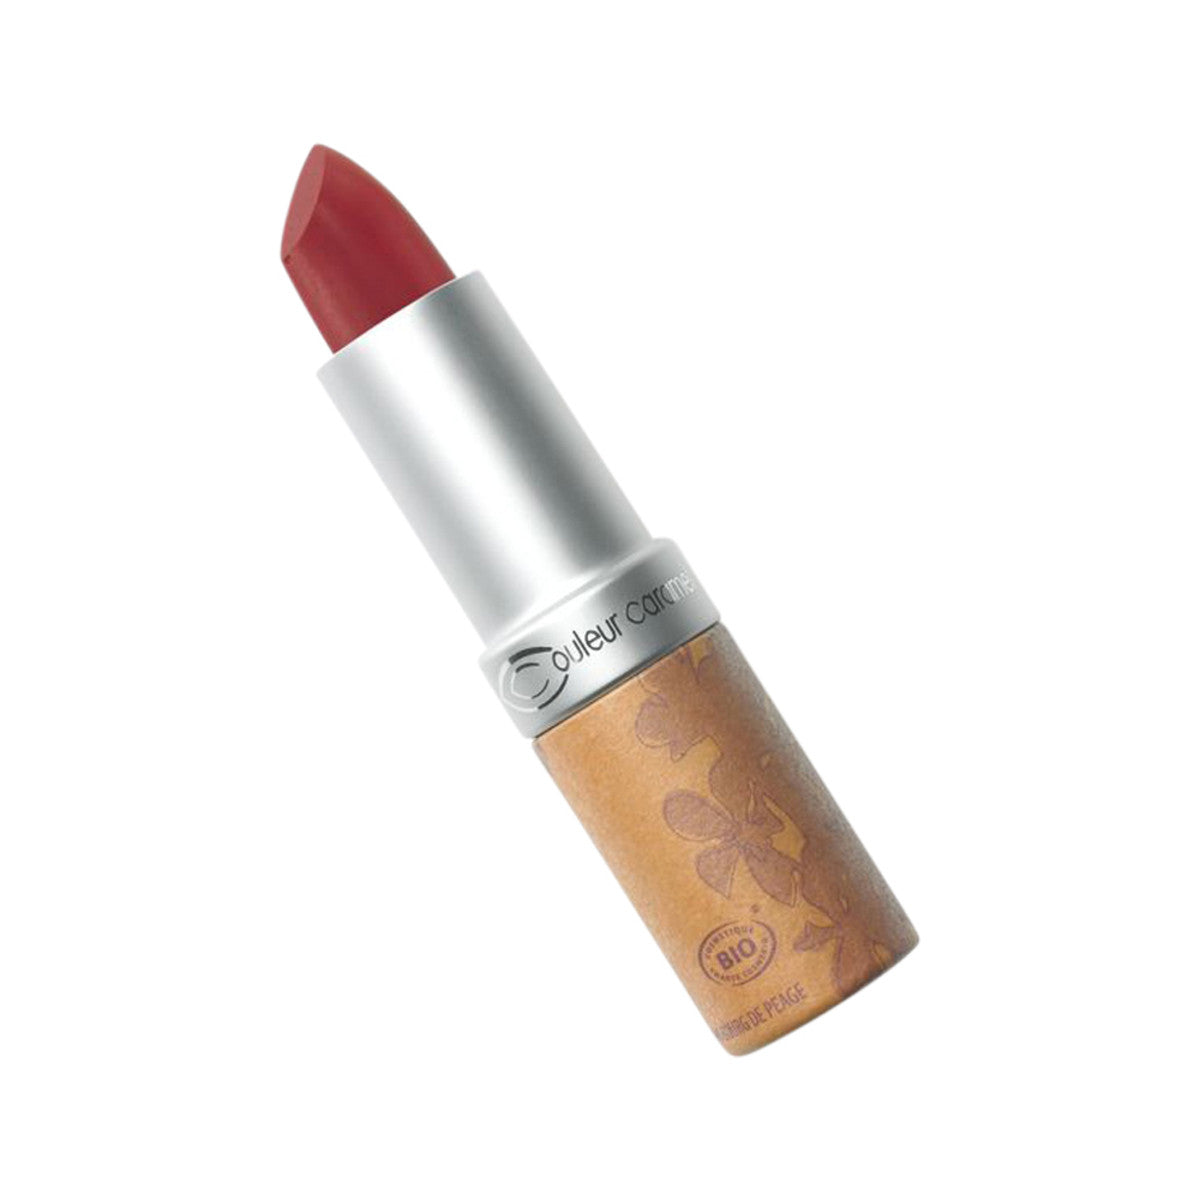 Couleur Caramel - Lipstick Glossy True Red (223)